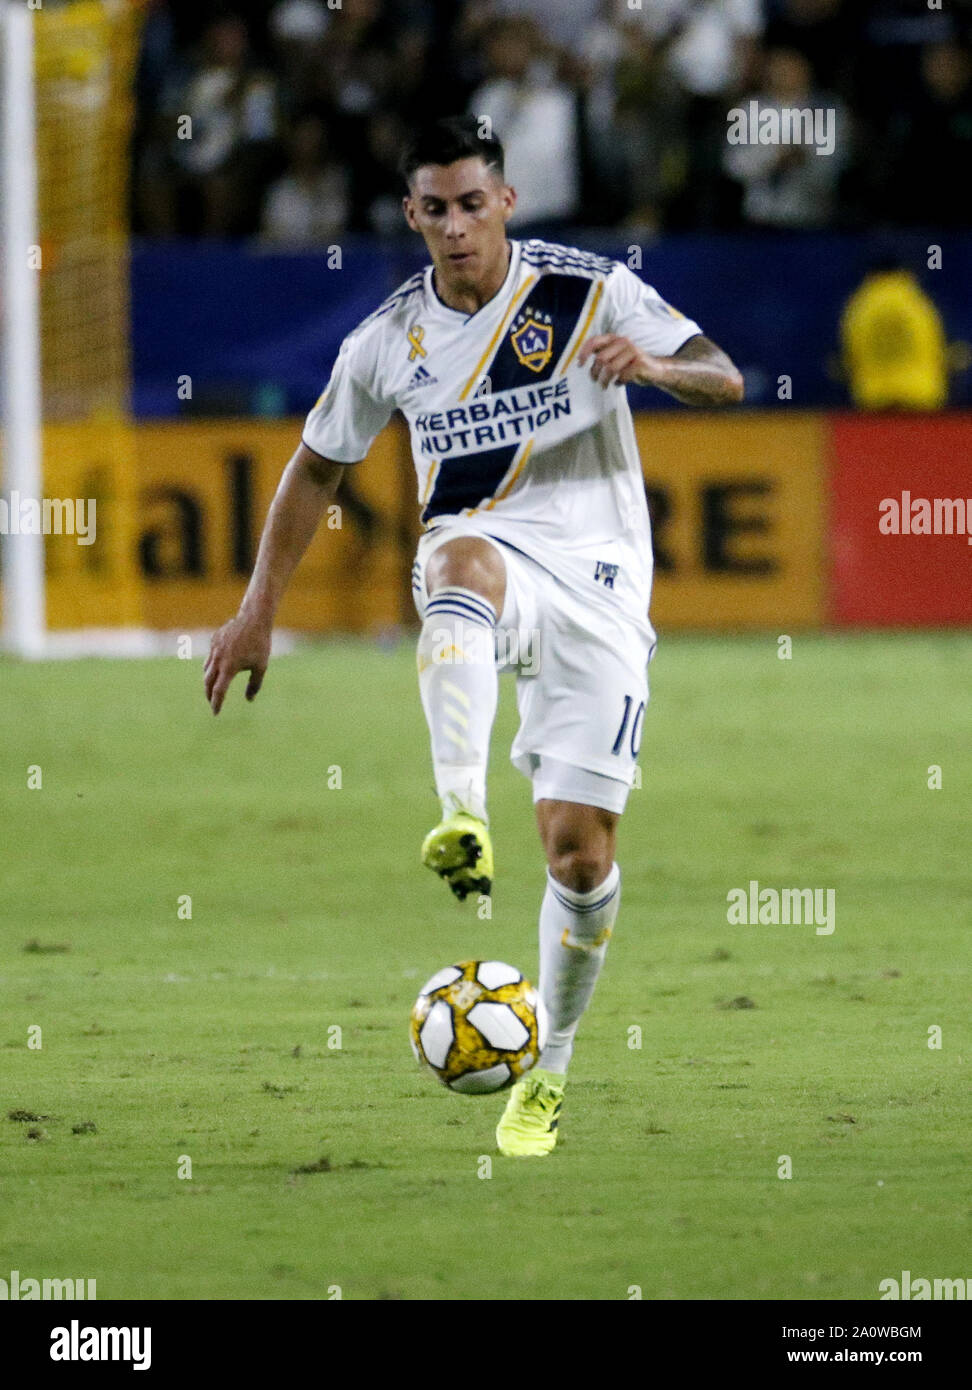 Los Angeles, California, USA. 21st Sep, 2019. LA Galaxy forward Cristian Pavon (10) controls the ball during the 2019 Major League Soccer (MLS) match between LA Galaxy and Montreal Impact in Carson, California, September 21, 2019. Credit: Ringo Chiu/ZUMA Wire/Alamy Live News Stock Photo